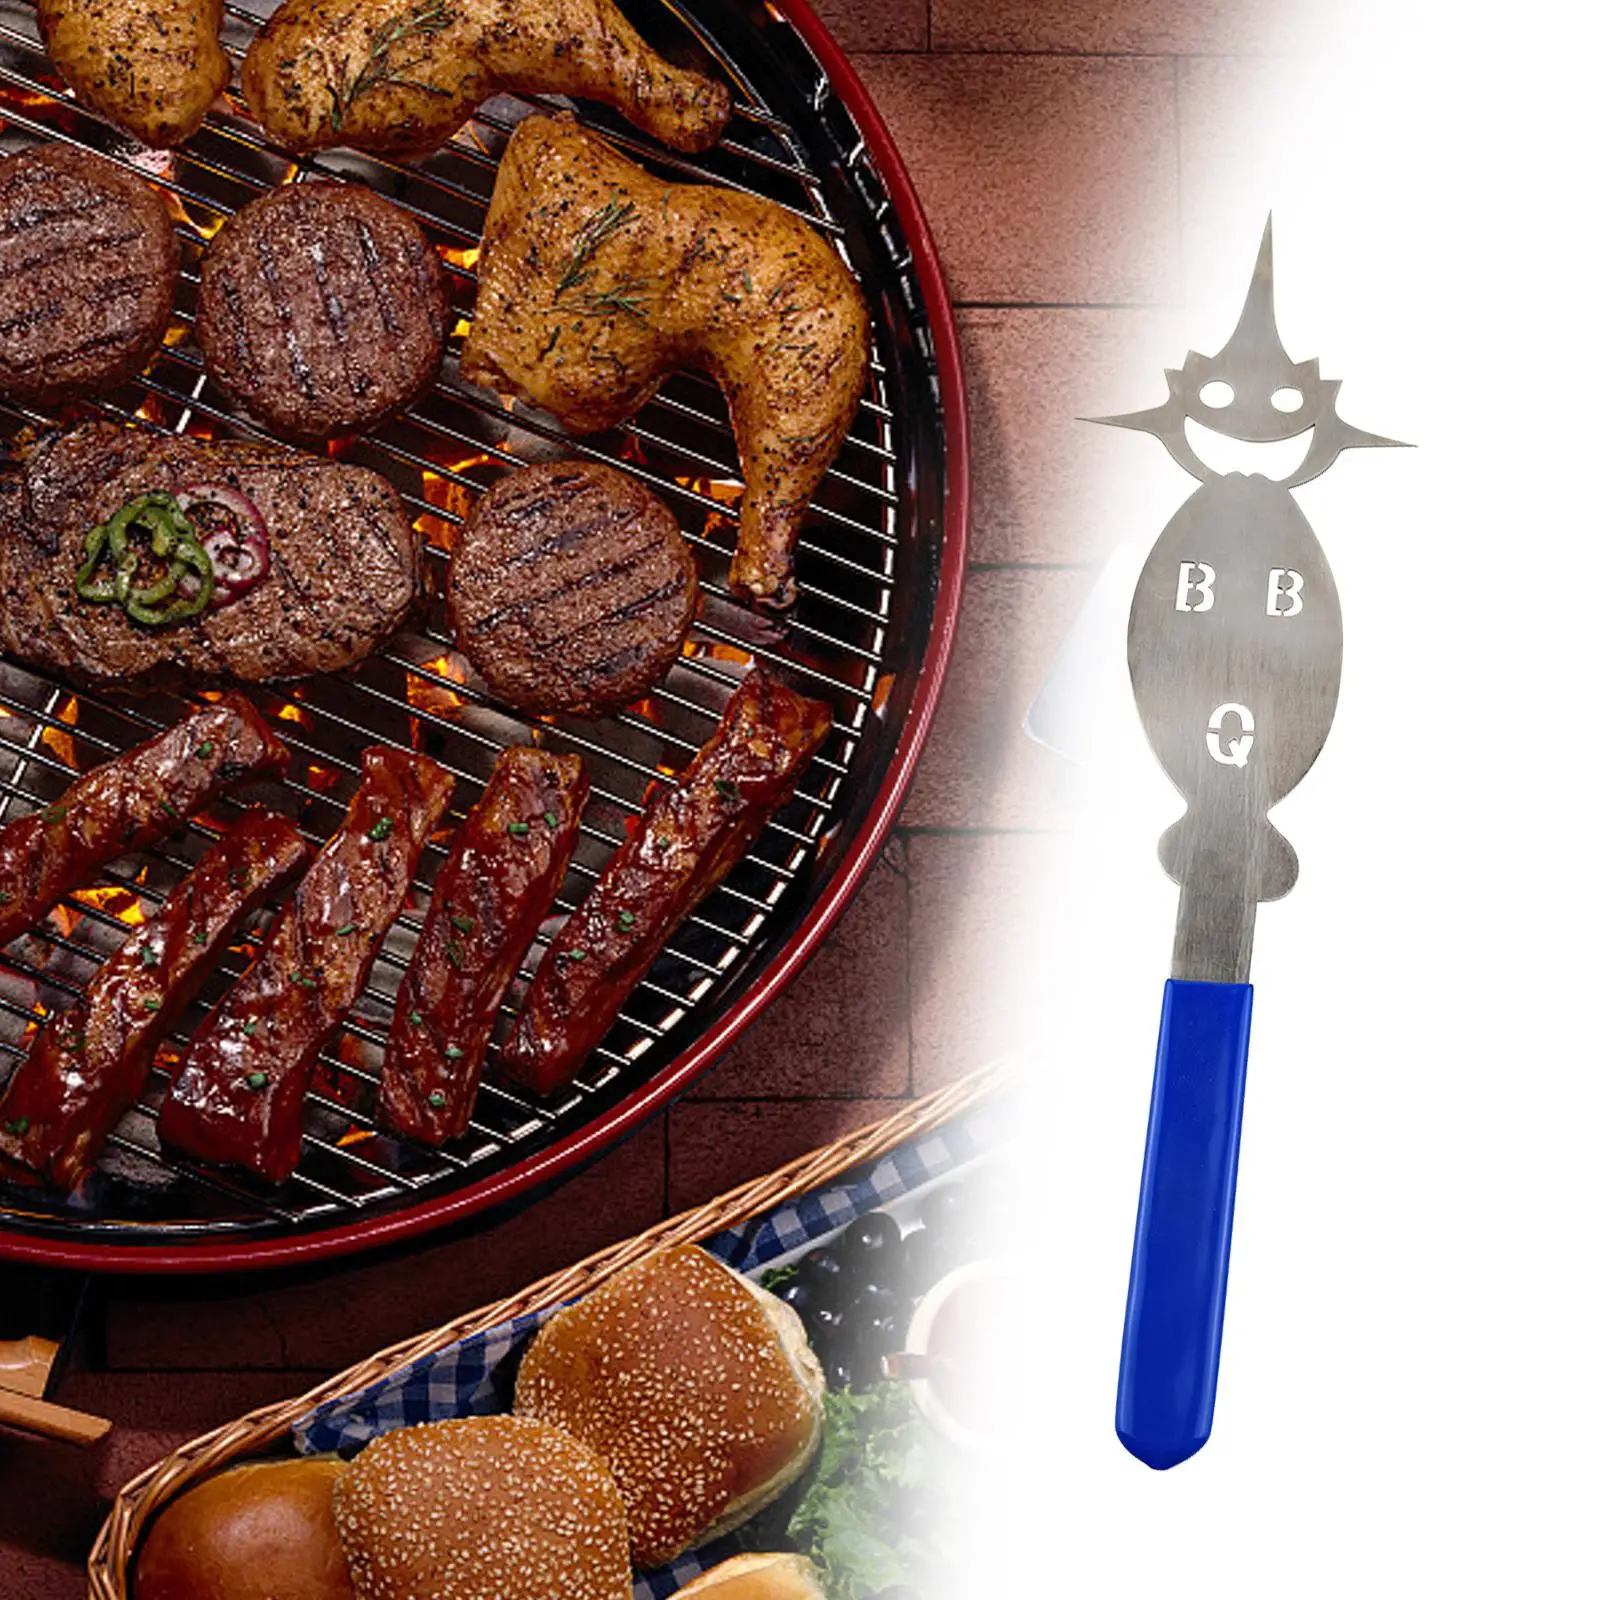 Barbecue Fork Grill Tools Portable Multipurpose Reusable Kitchen Supplies bbq Accessories for Home BBQ Cooking Meat Sausages